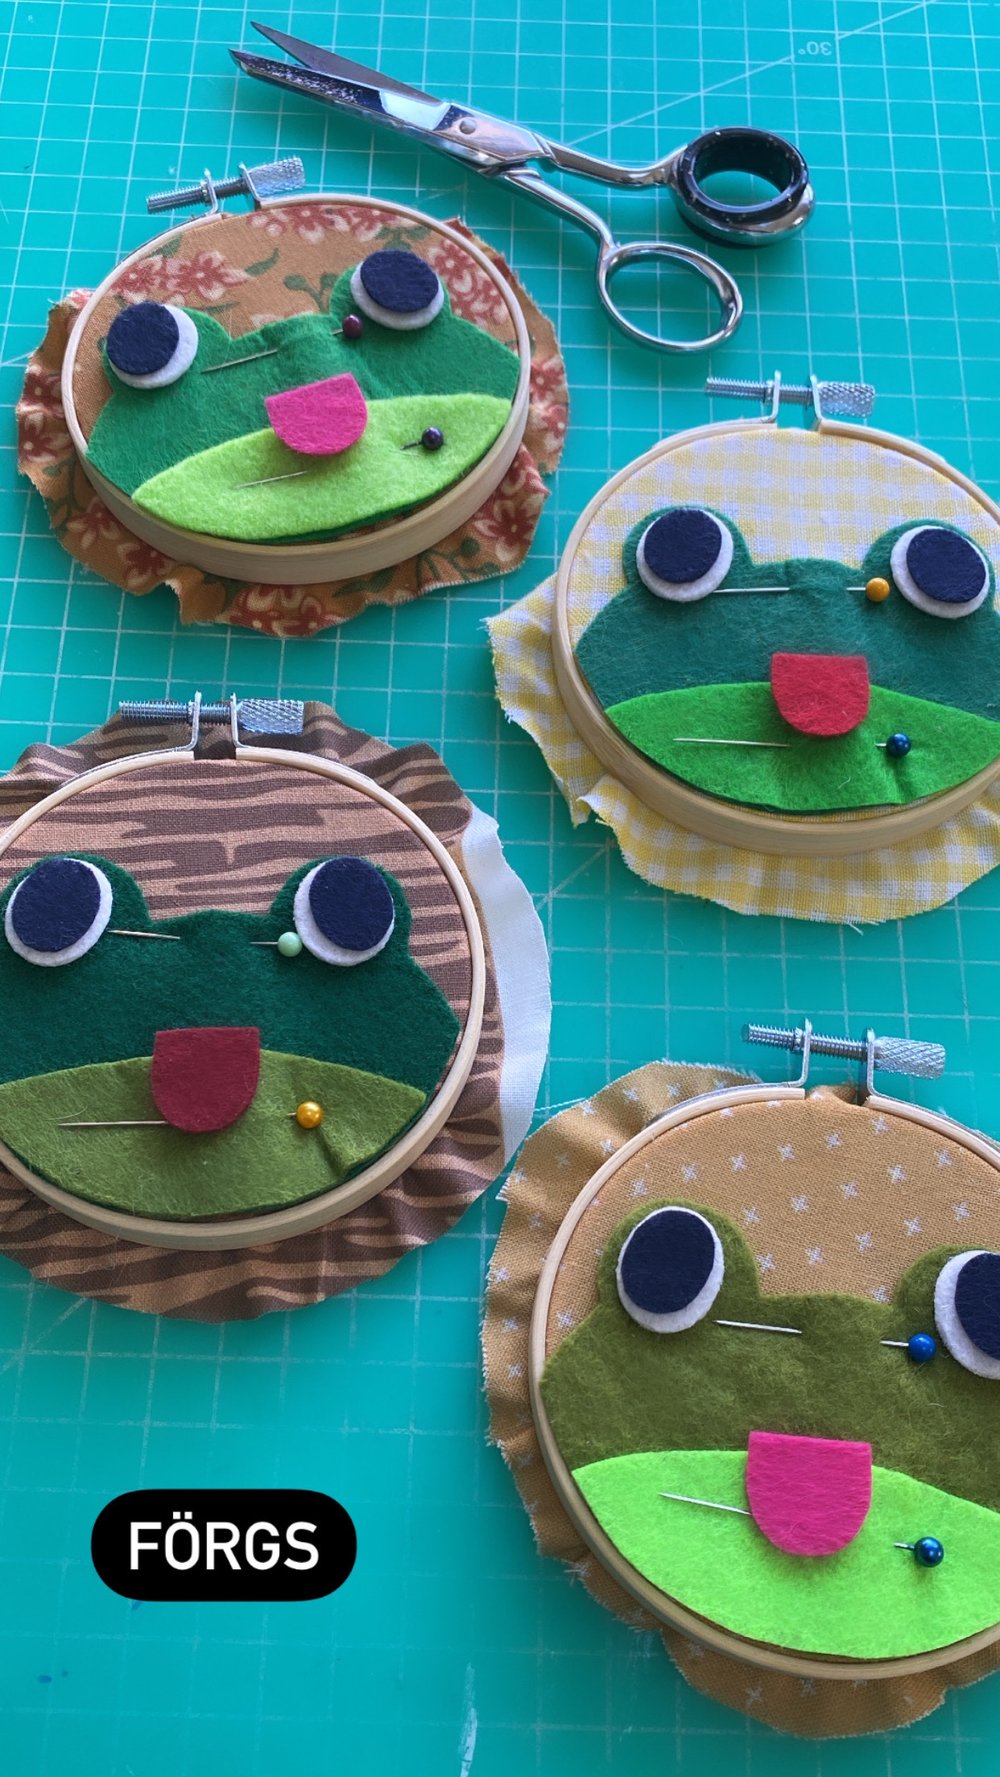 Frog embroidery hoops